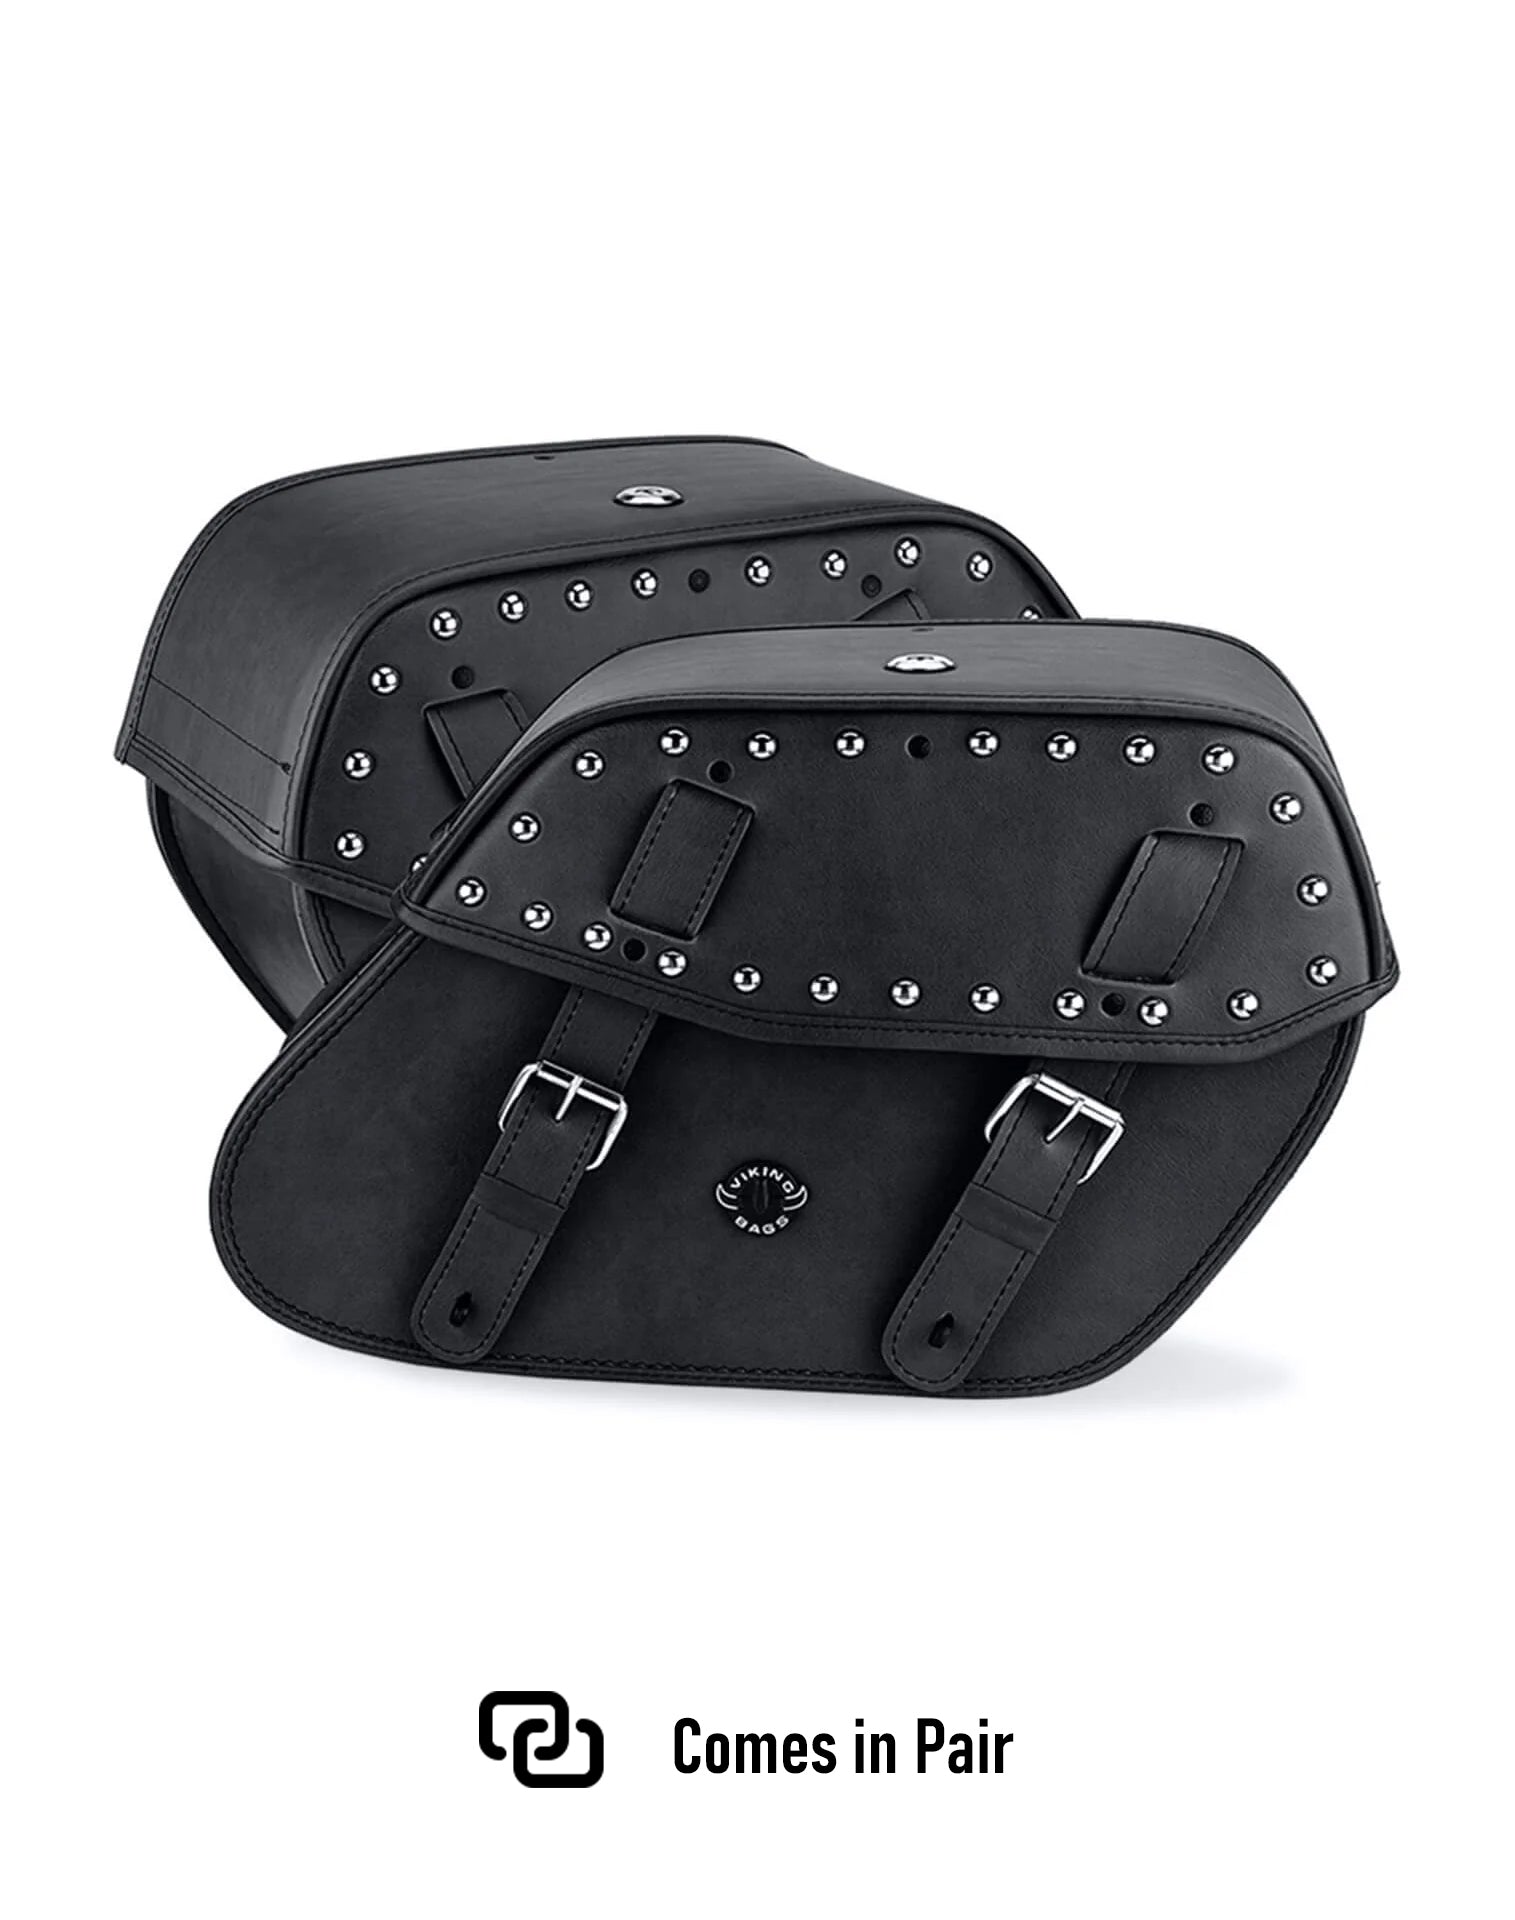 Viking Odin Large Suzuki Volusia 800 Leather Studded Motorcycle Saddlebags Weather Resistant Bags Comes in Pair